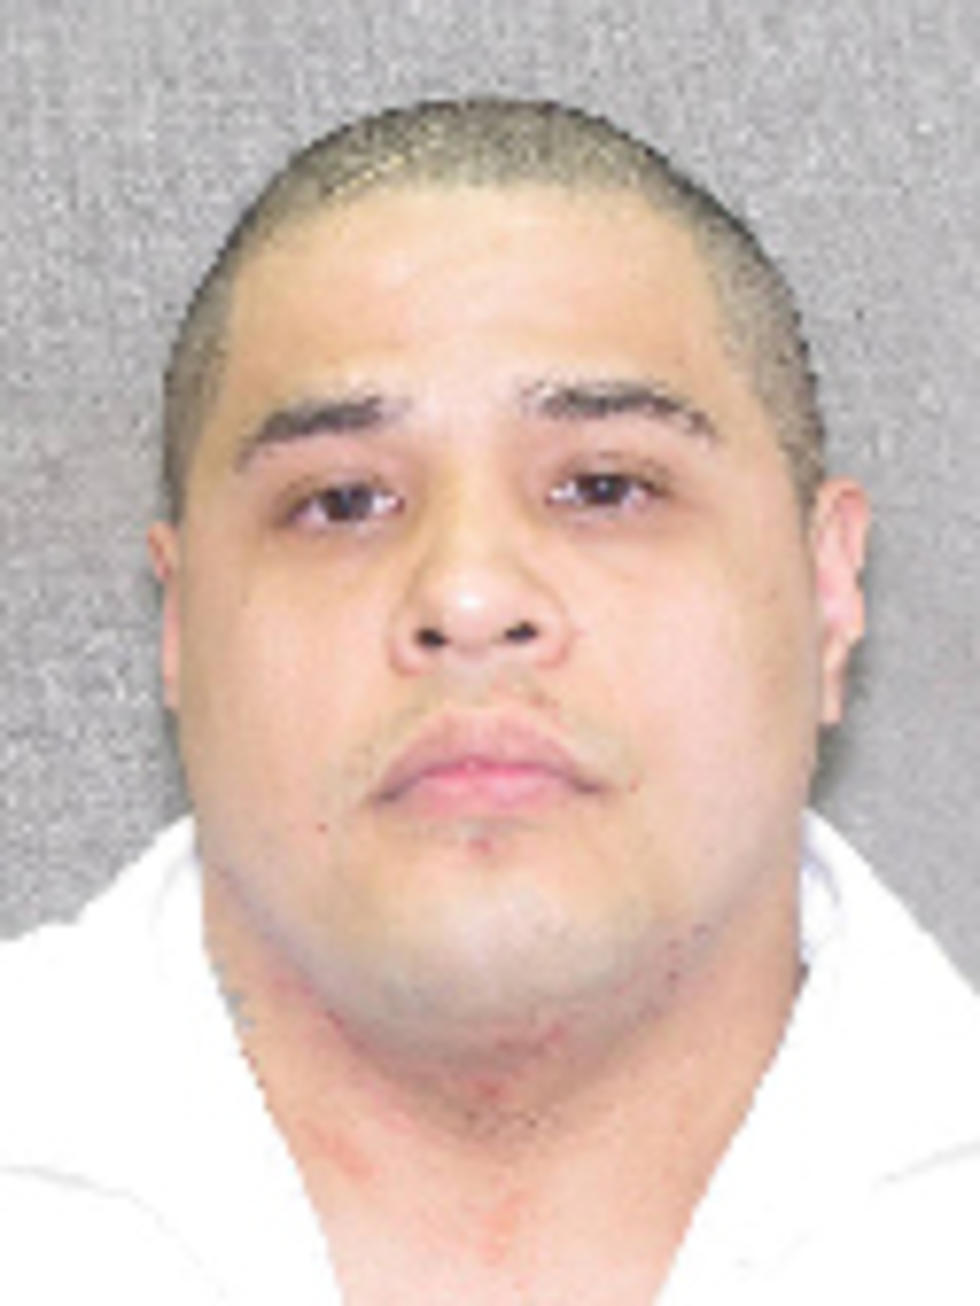 Death Row Takes 15th Life this Year